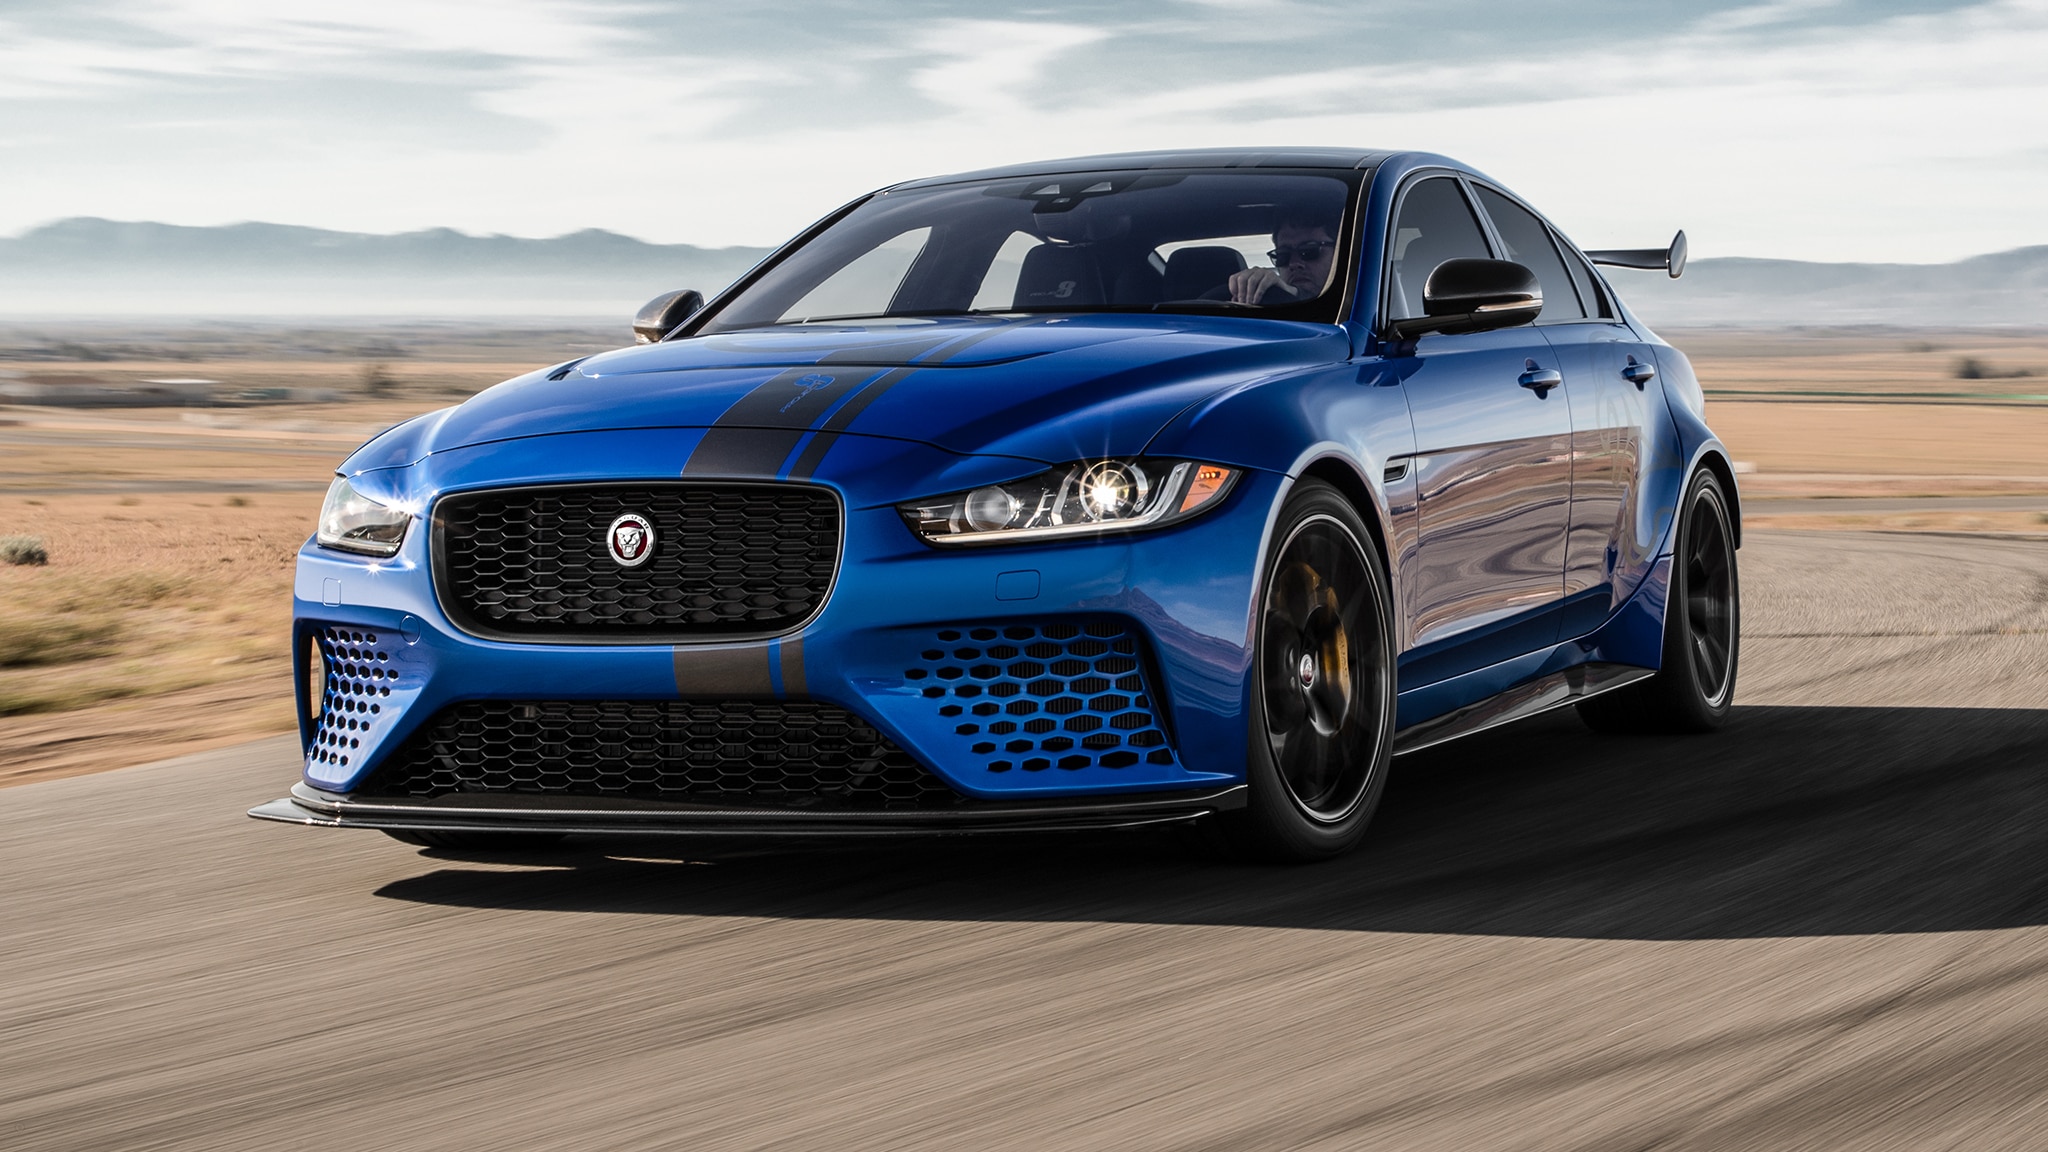 Jaguar XE SV Project 8 First Test: Exclusive and Extreme